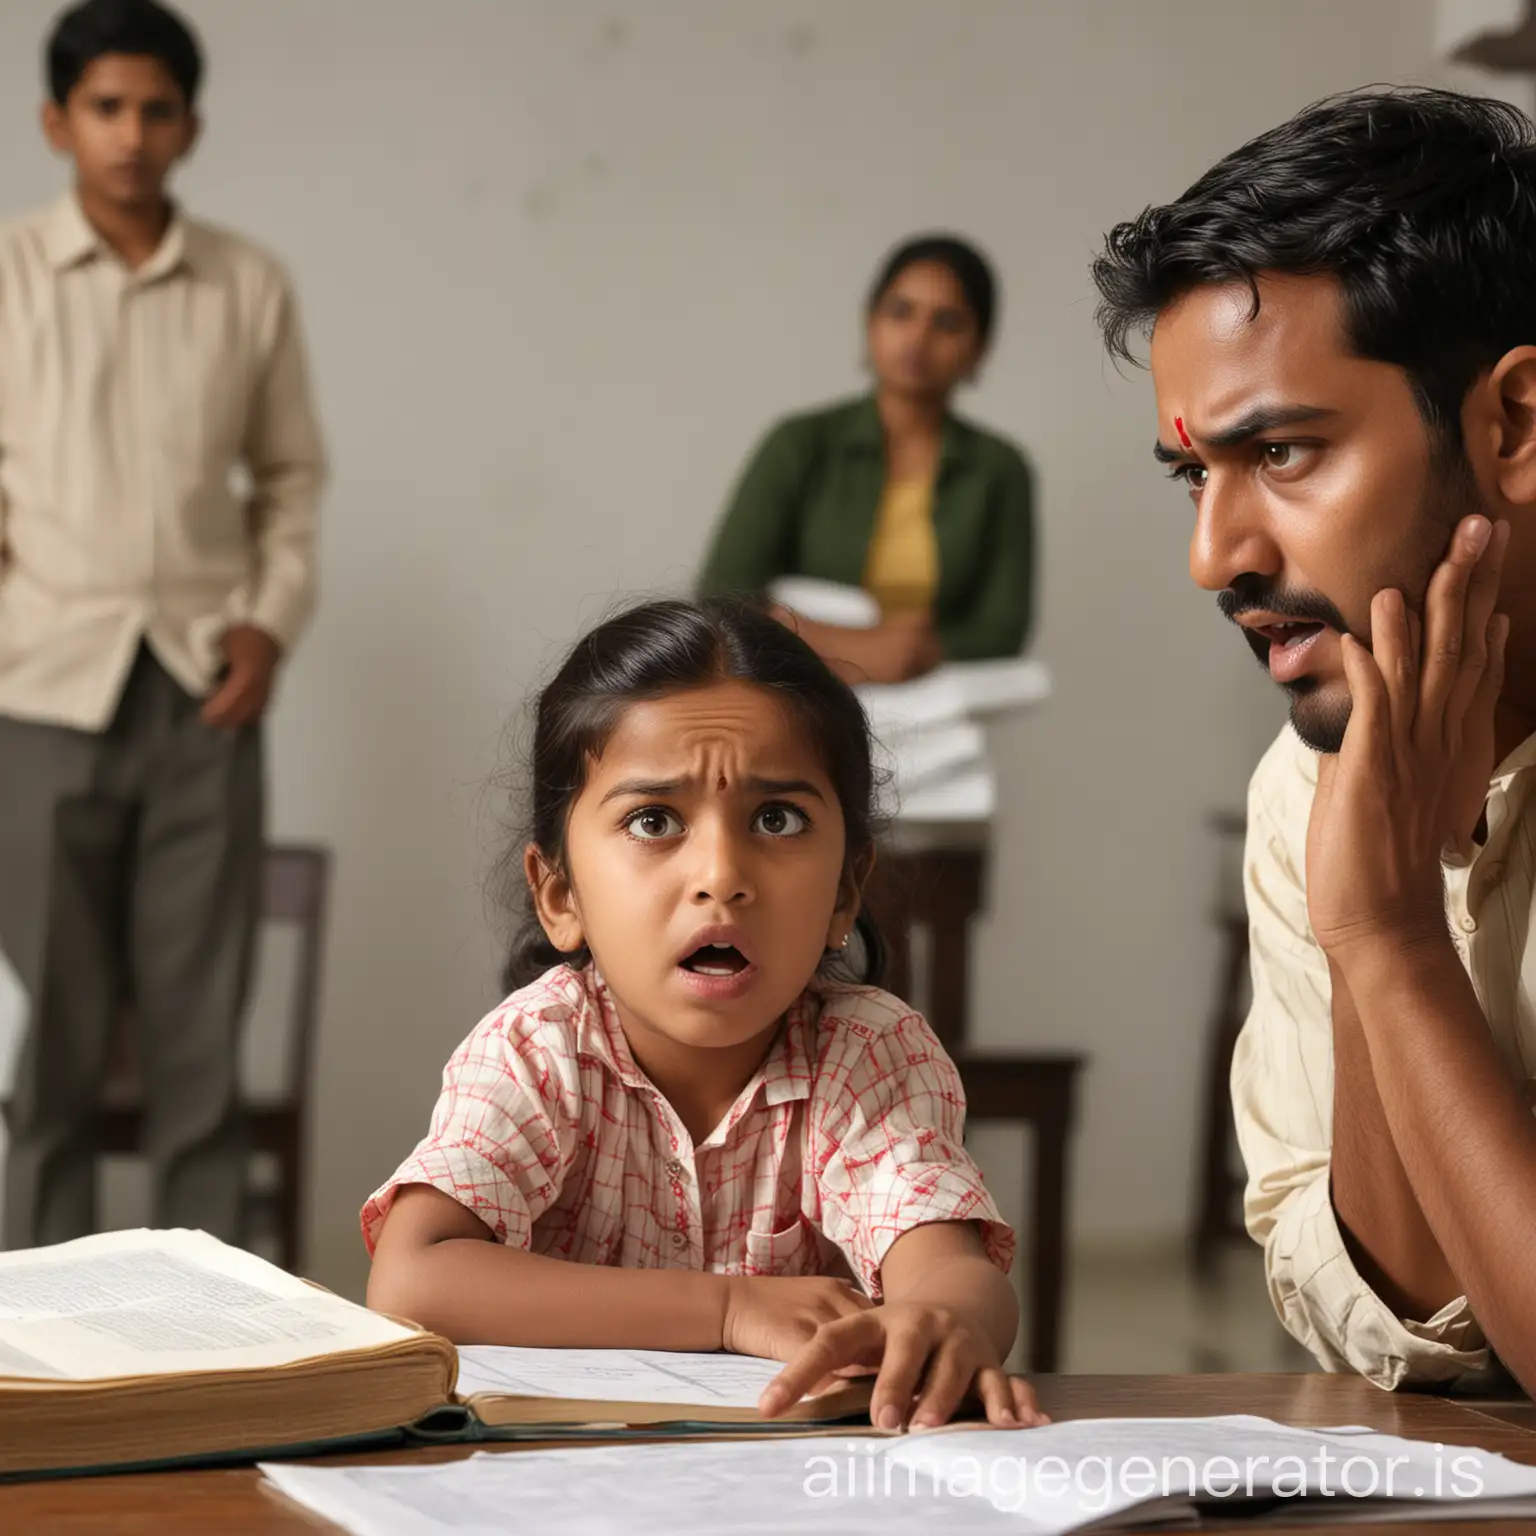 Indian face, father and mother arguing behind, child studying in the foreground, child's painful expression